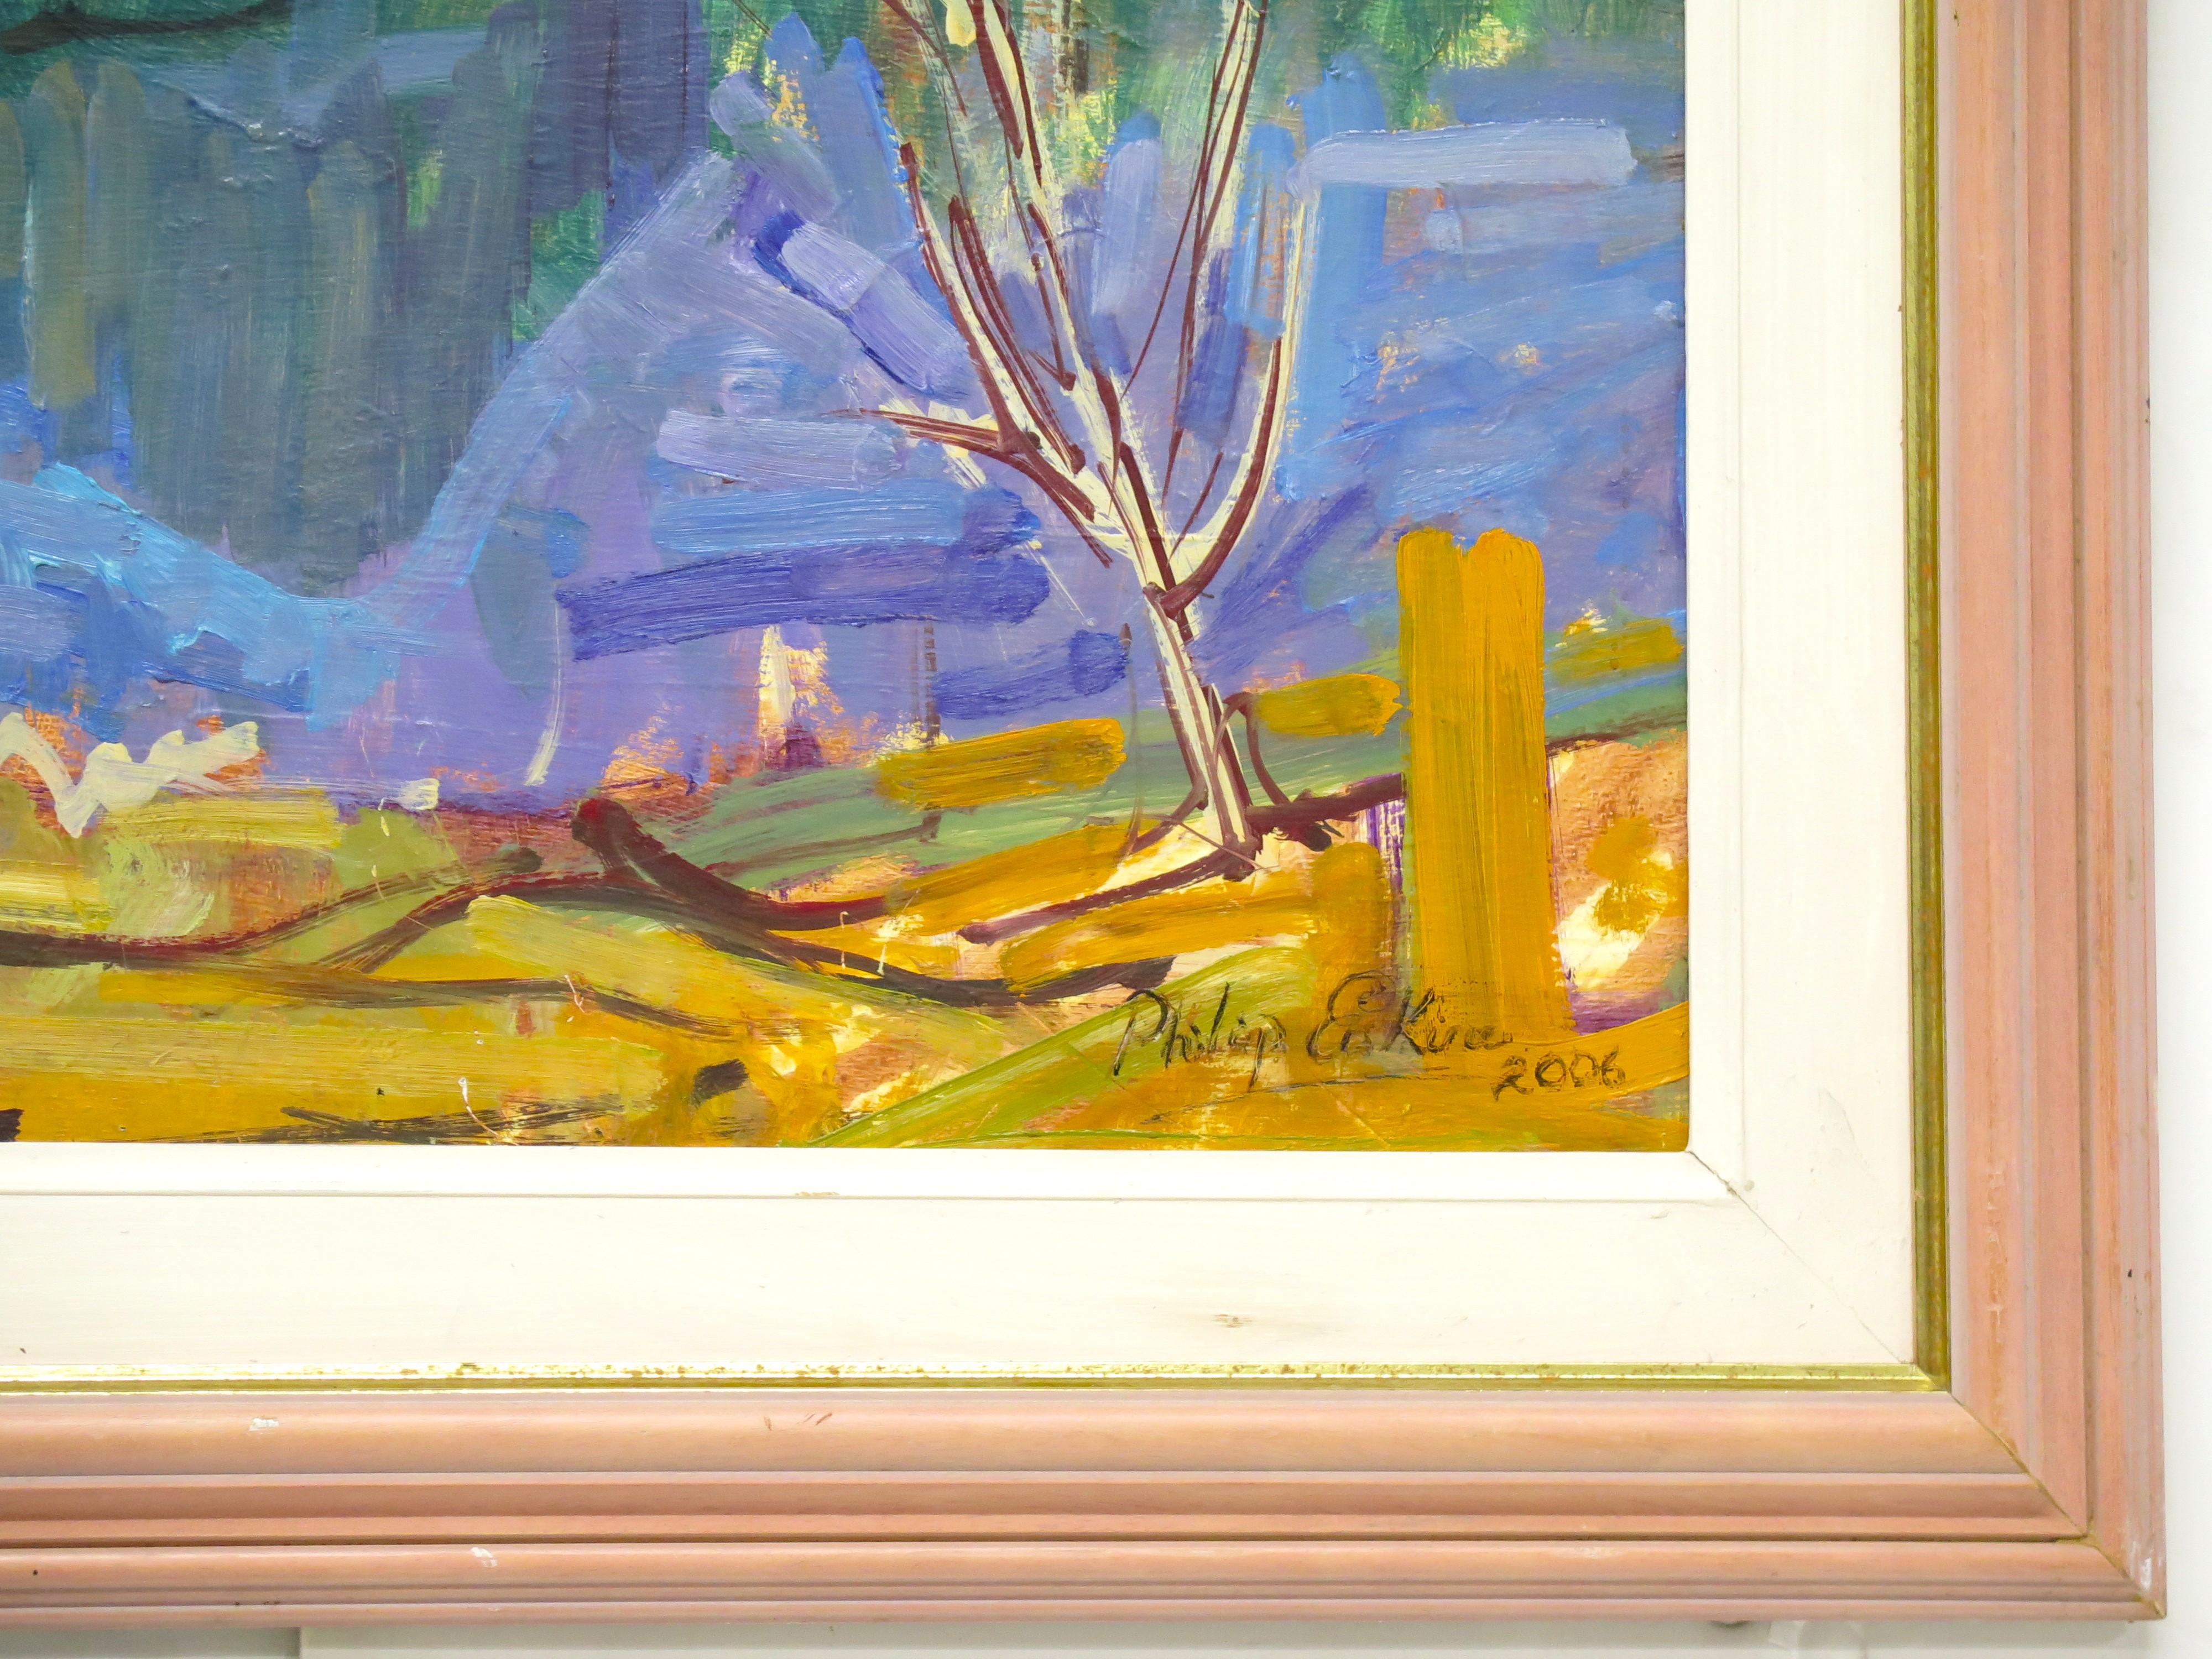 Canvas 2006 Landscape by Philip Erskine (South African 1933- ) For Sale